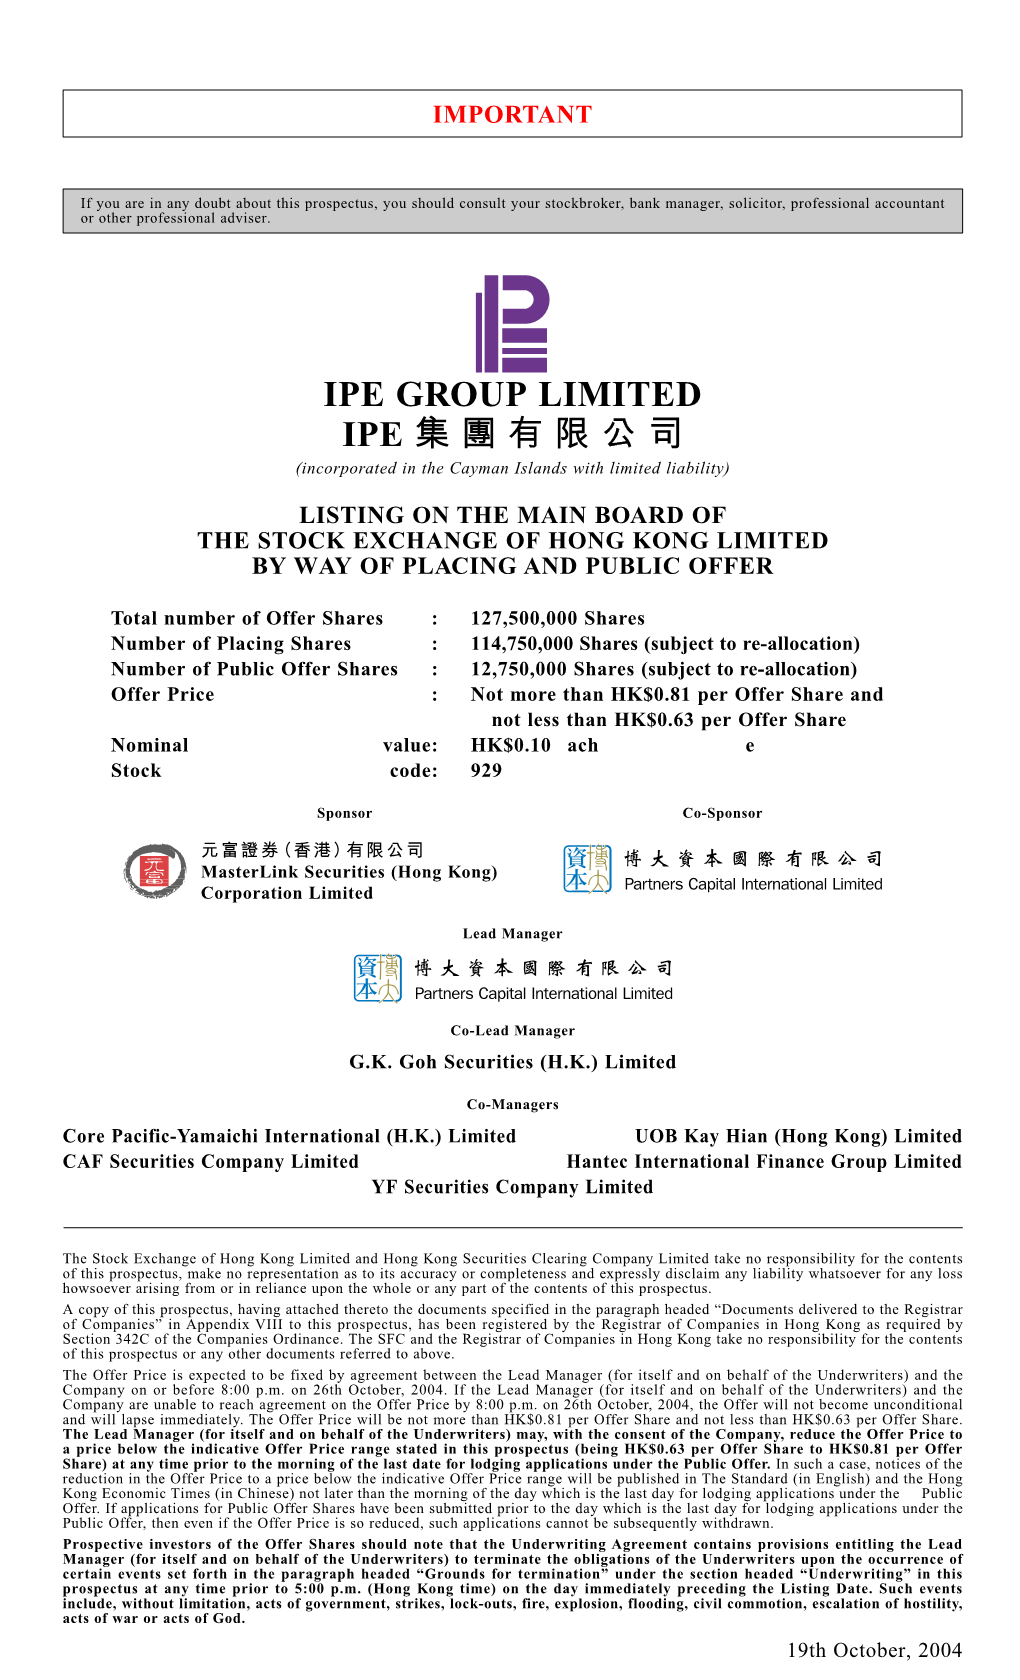 IPE GROUP LIMITED IPE 集團有限公司 (Incorporated in the Cayman Islands with Limited Liability)